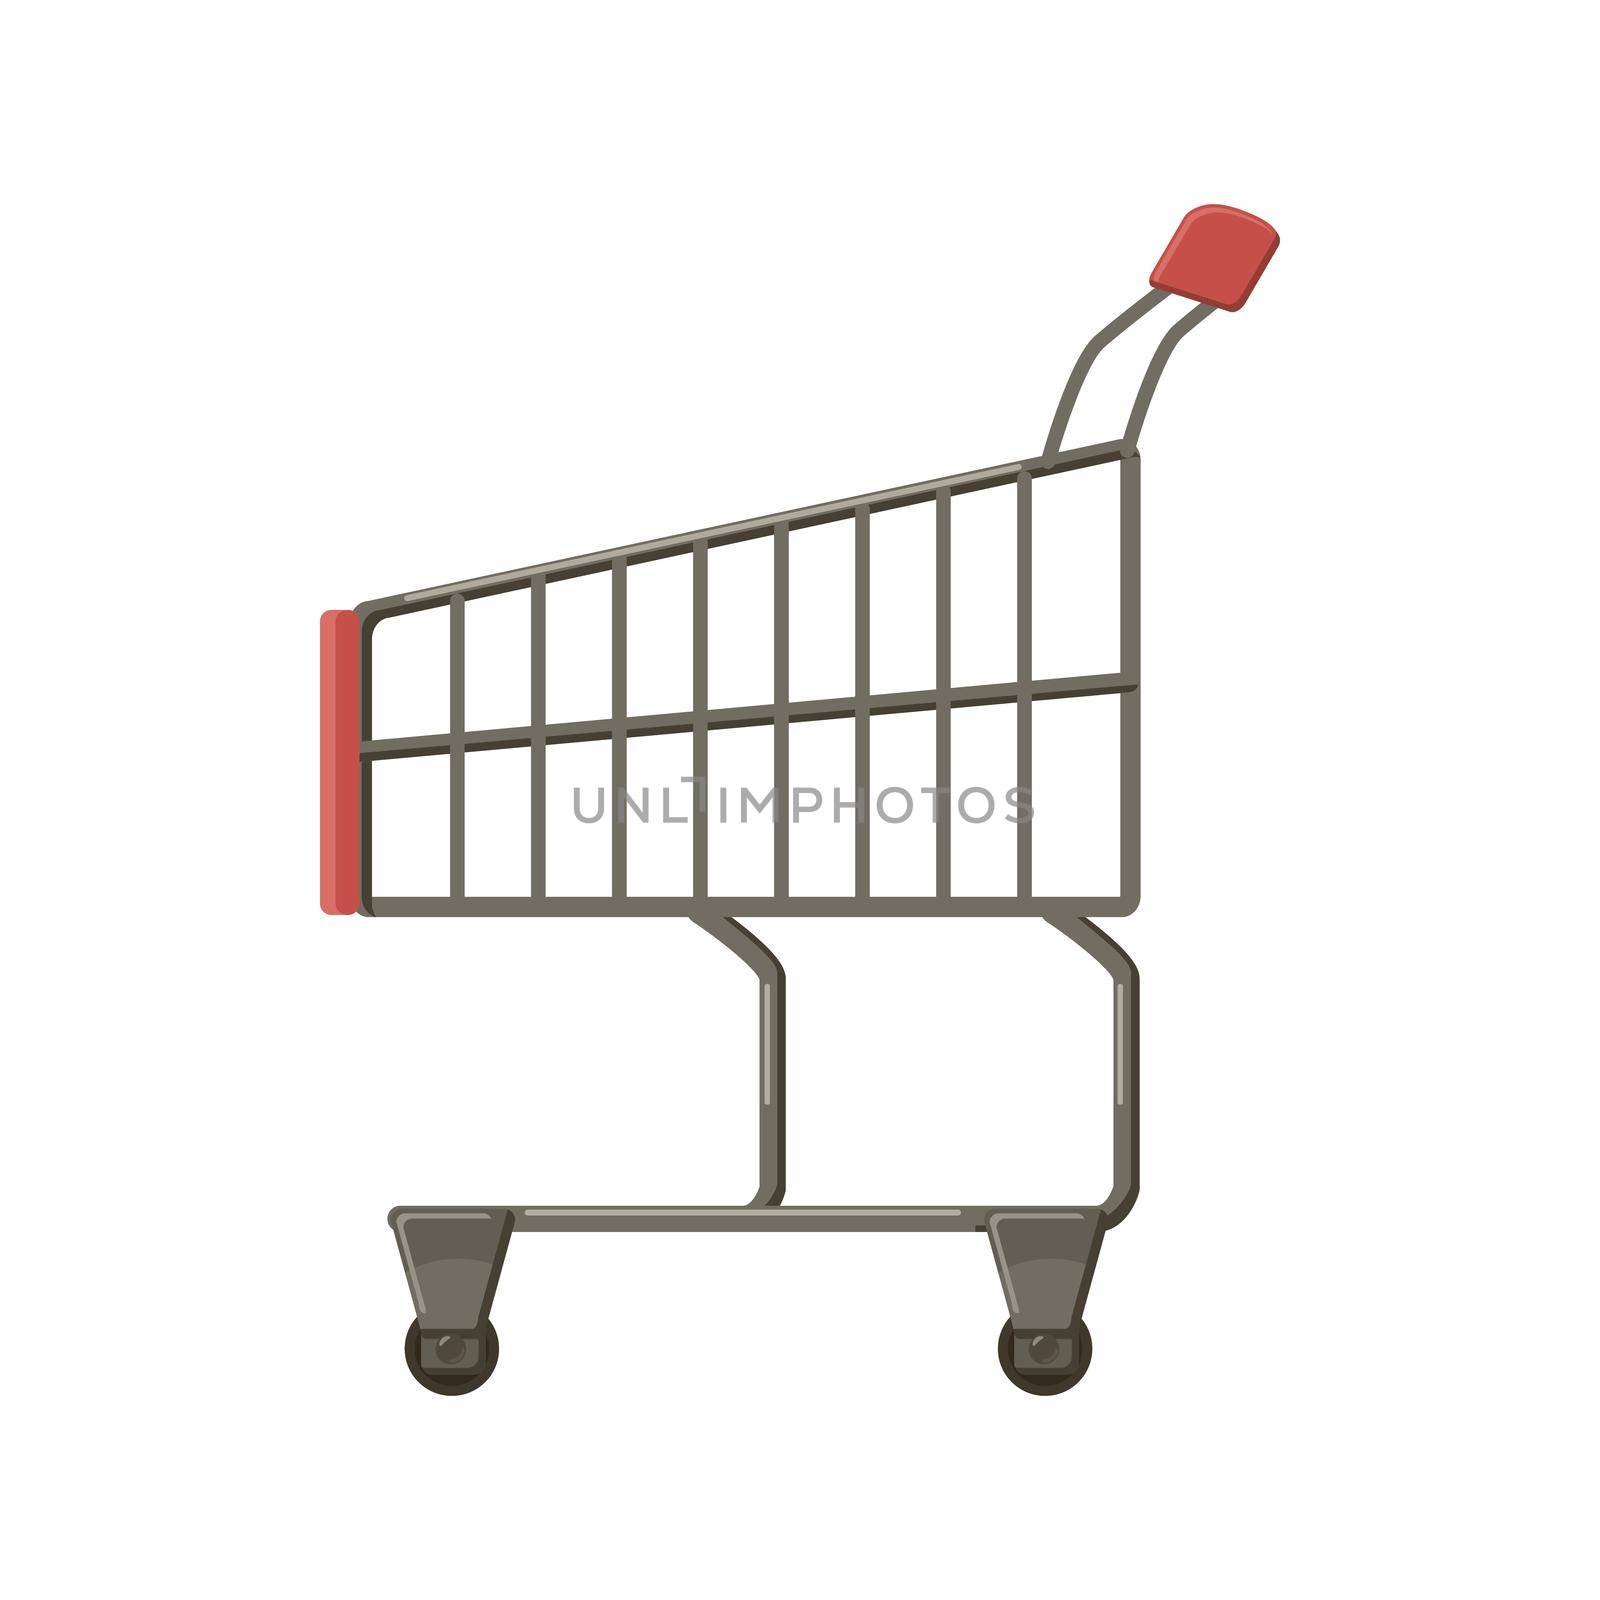 Shopping cart icon, cartoon style by ylivdesign